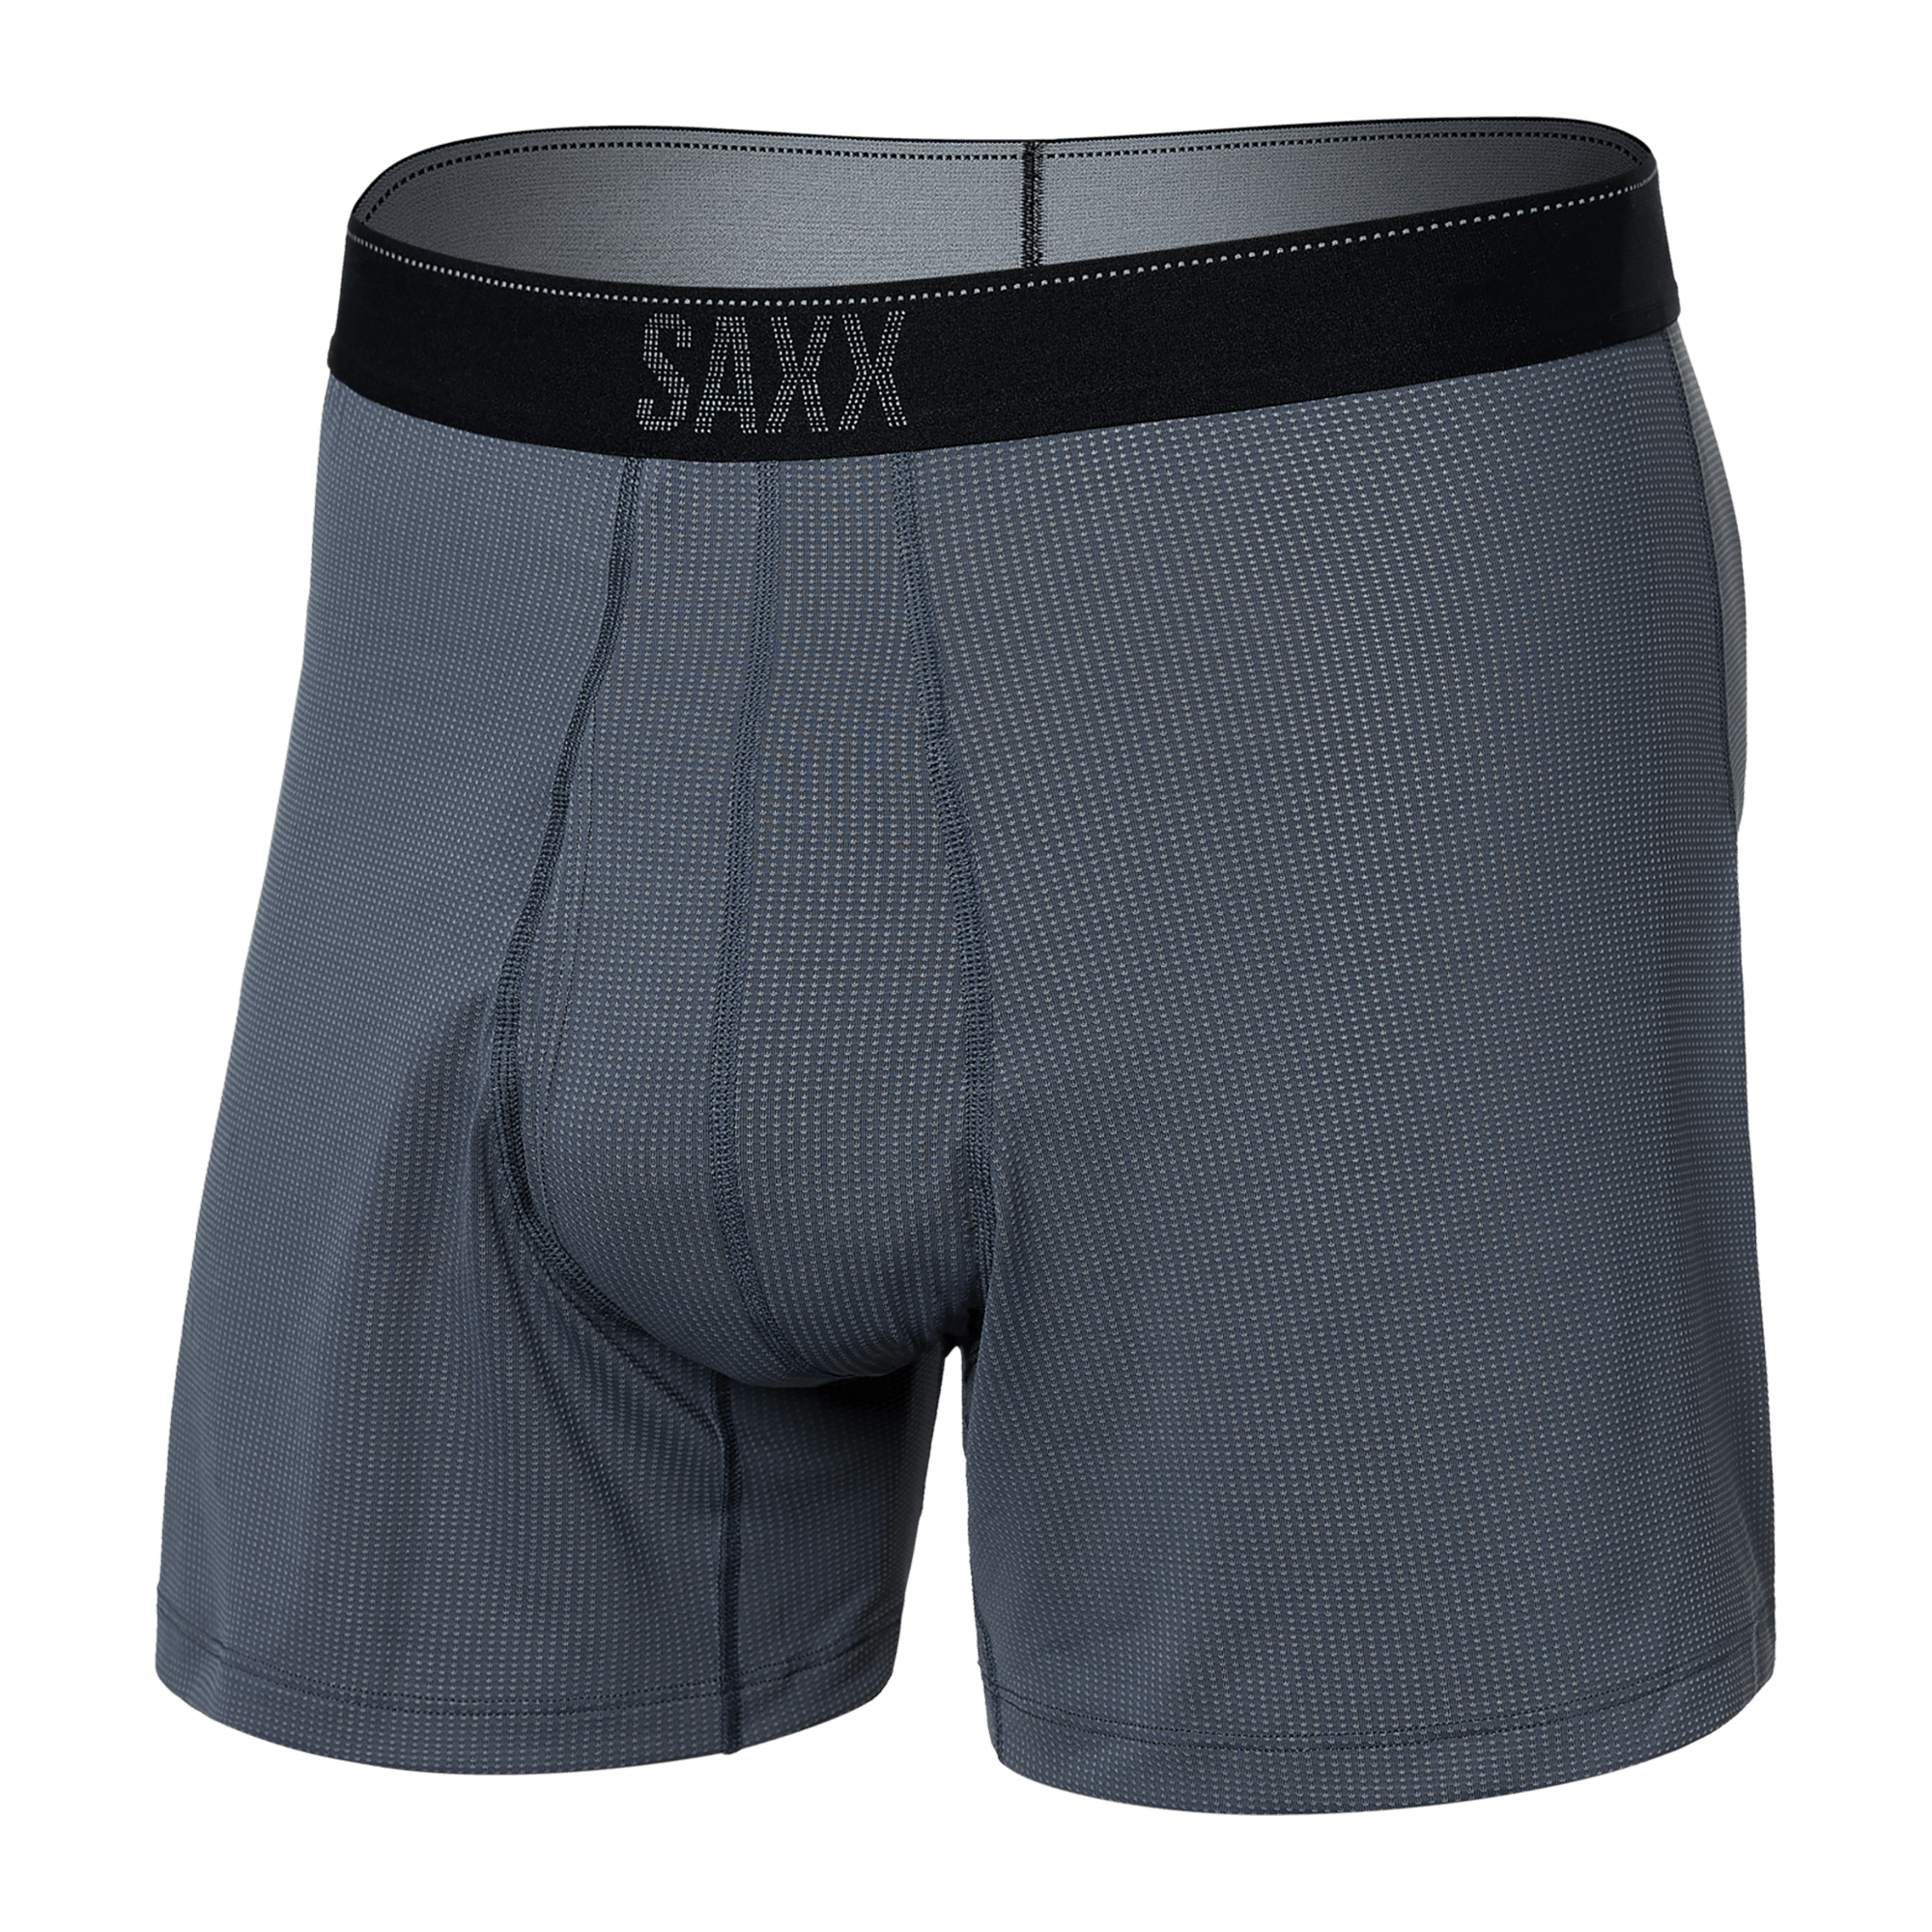 B.V.D. Mens Cotton Stretch Boxer Briefs (Moisture Wicking & Support Fly)